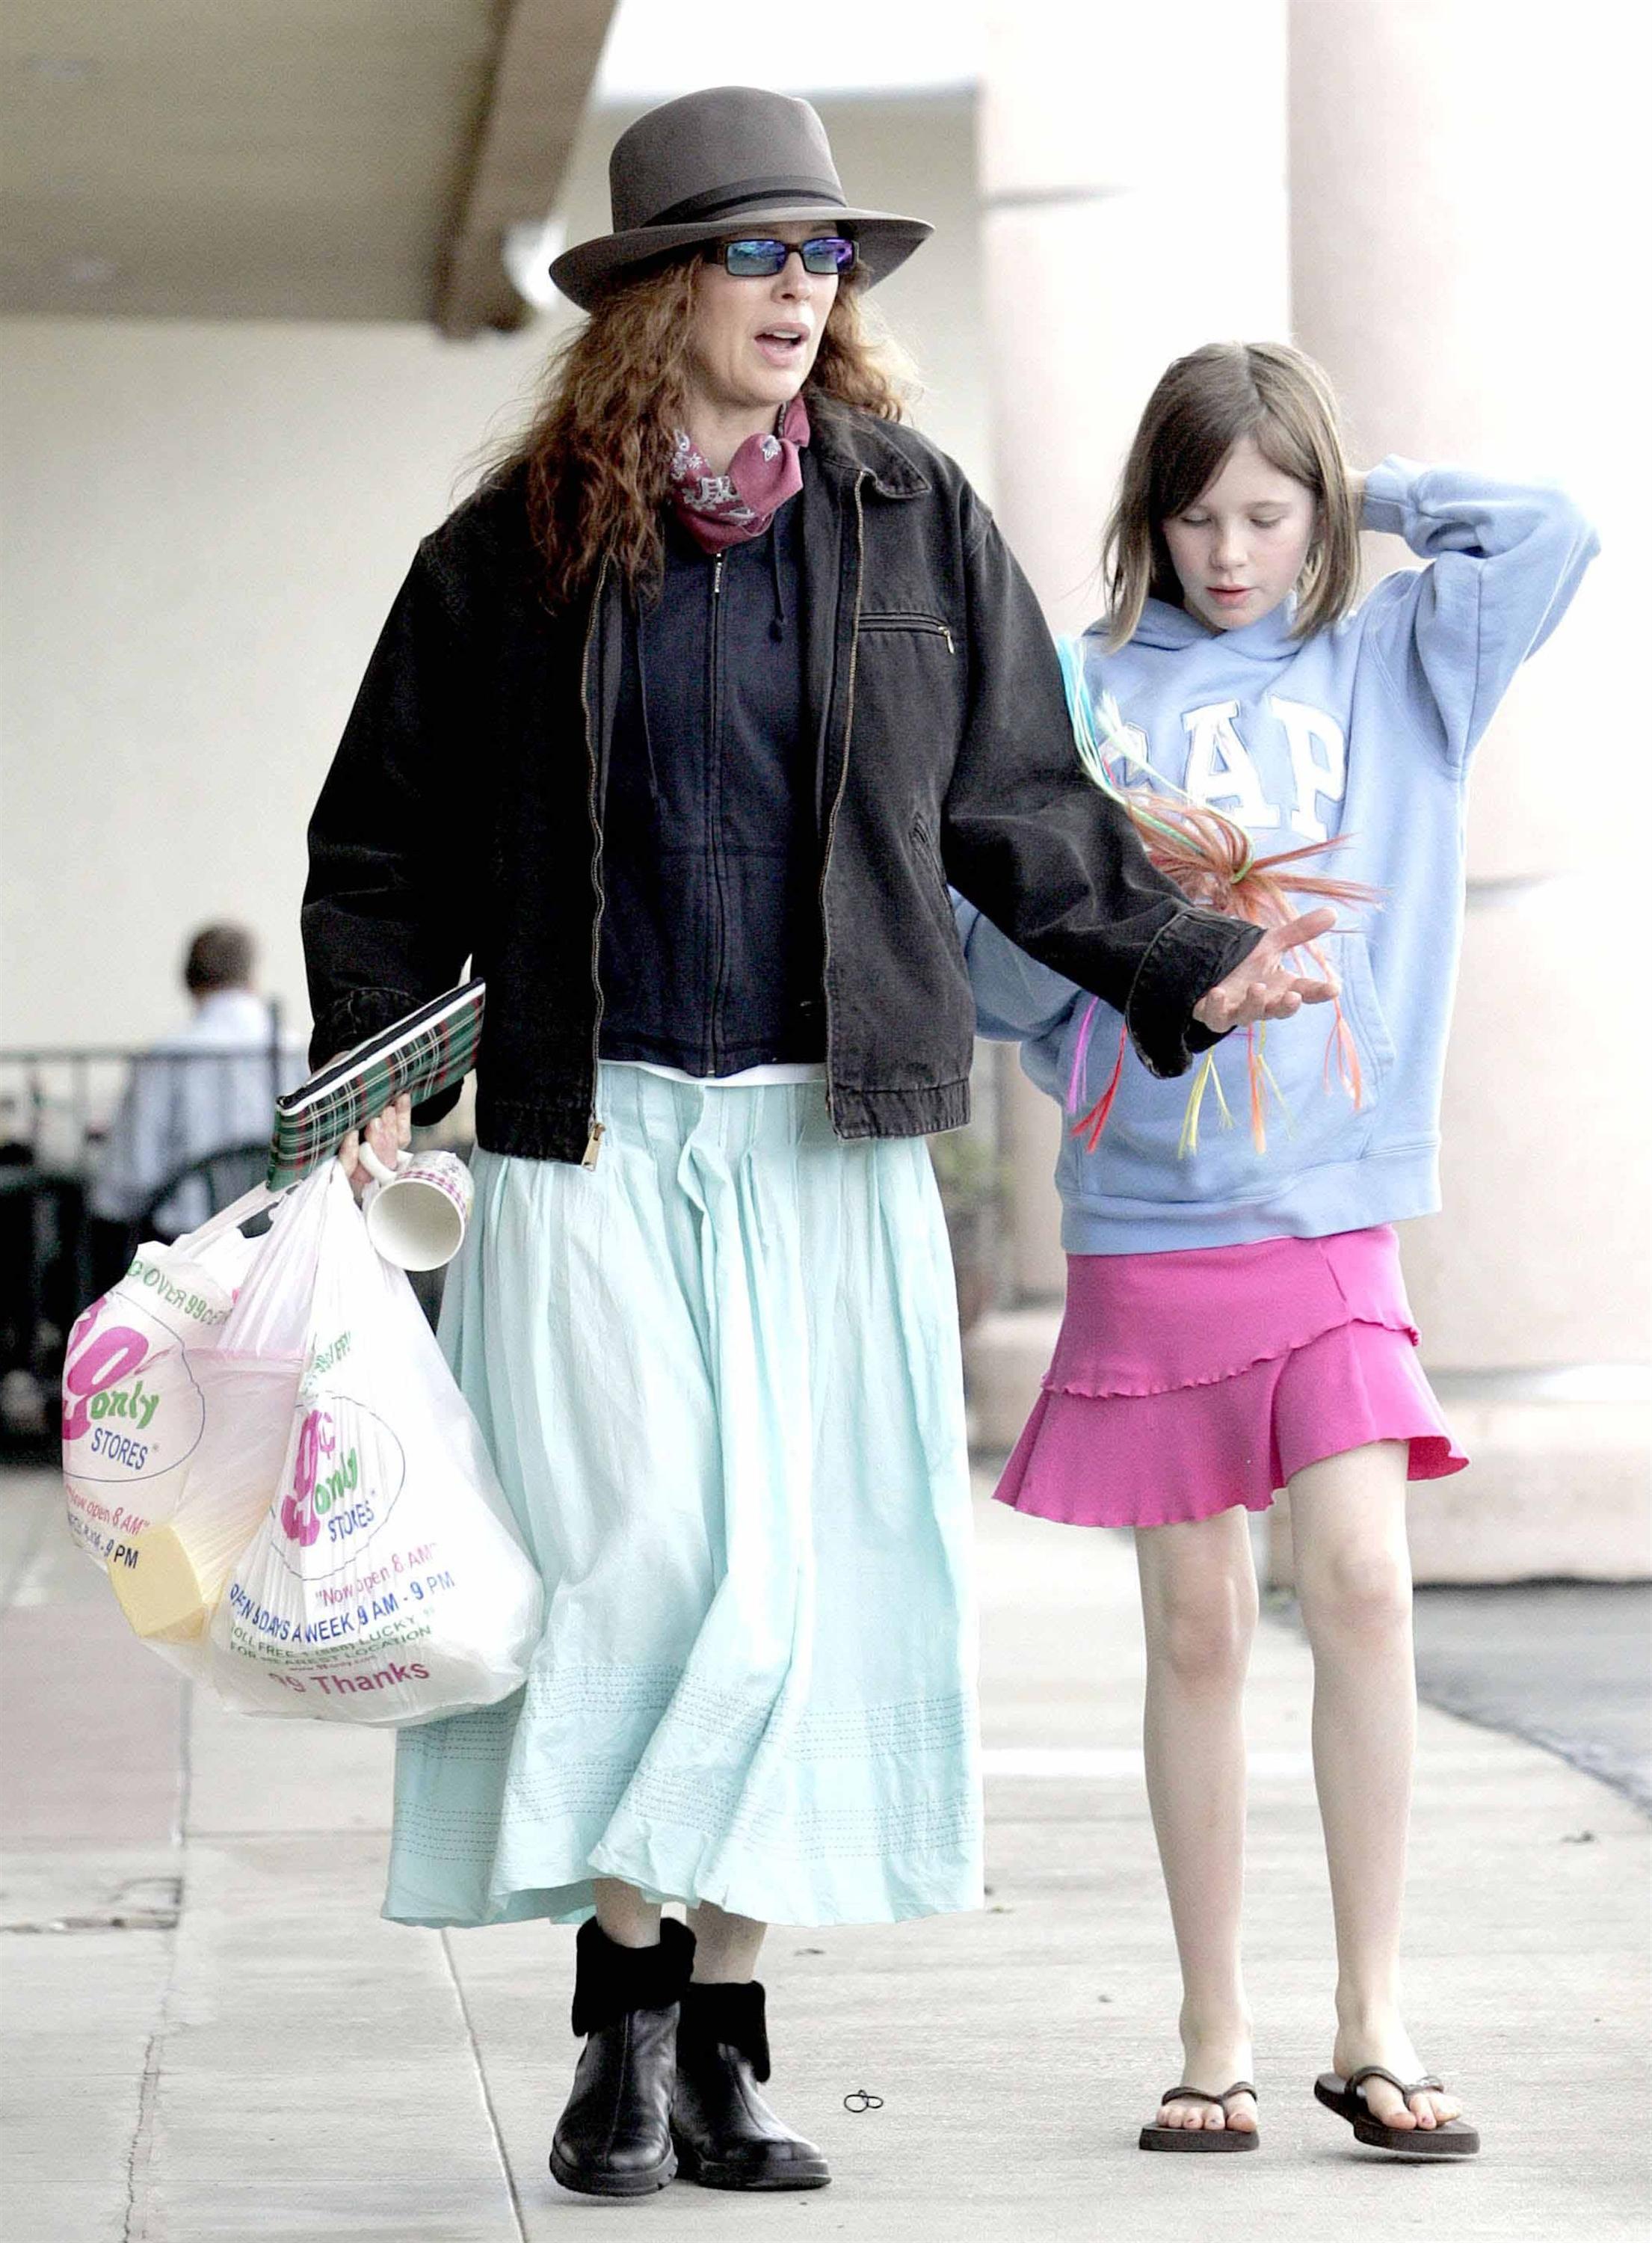 Kim Basinger with red hair and Ireland Baldwin on February 12, 2005 during Even Money shooting